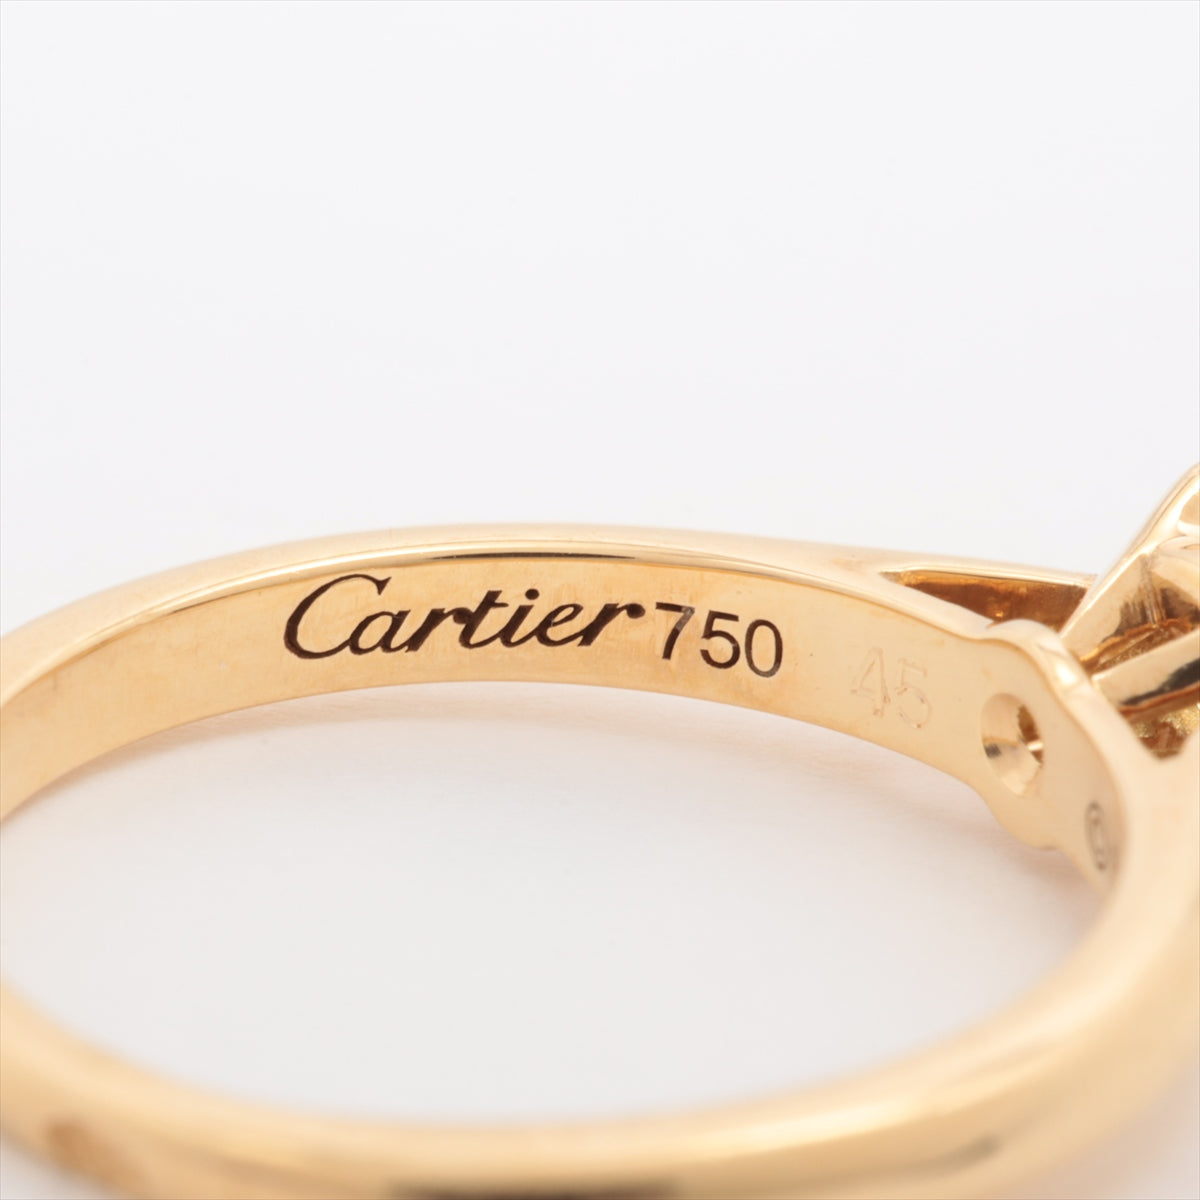 Cartier Solitaire 1895 Diamond Ring 750 (YG) 2.2g 0.27 45